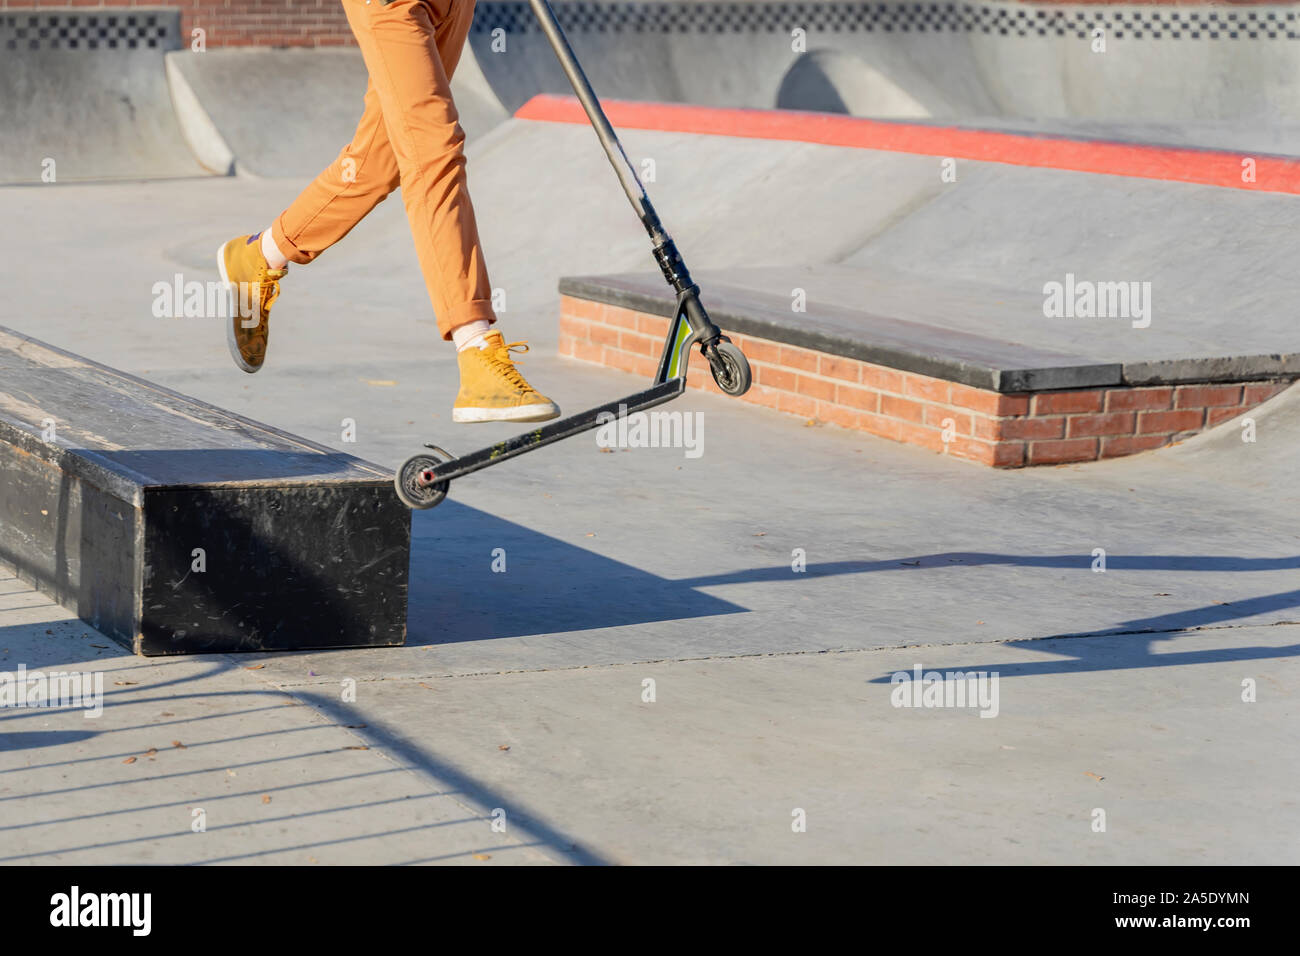 Feet in sneakers of teenager jumping a kick scooter at a skate park. Street culture of young Stock Photo